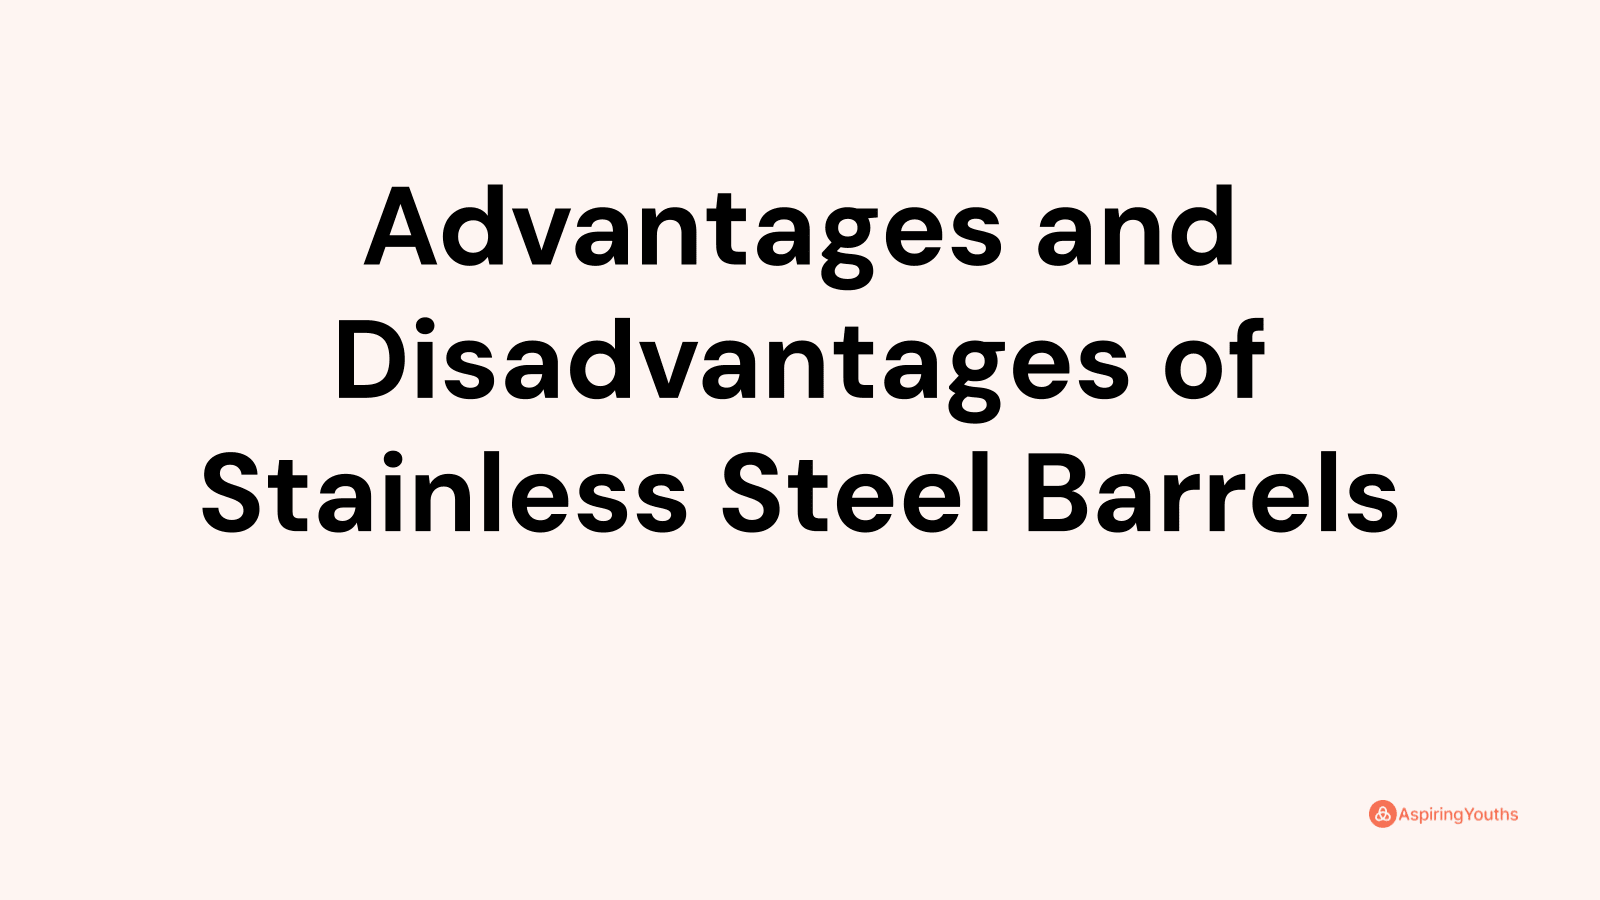 Advantages and disadvantages of Stainless Steel Barrels